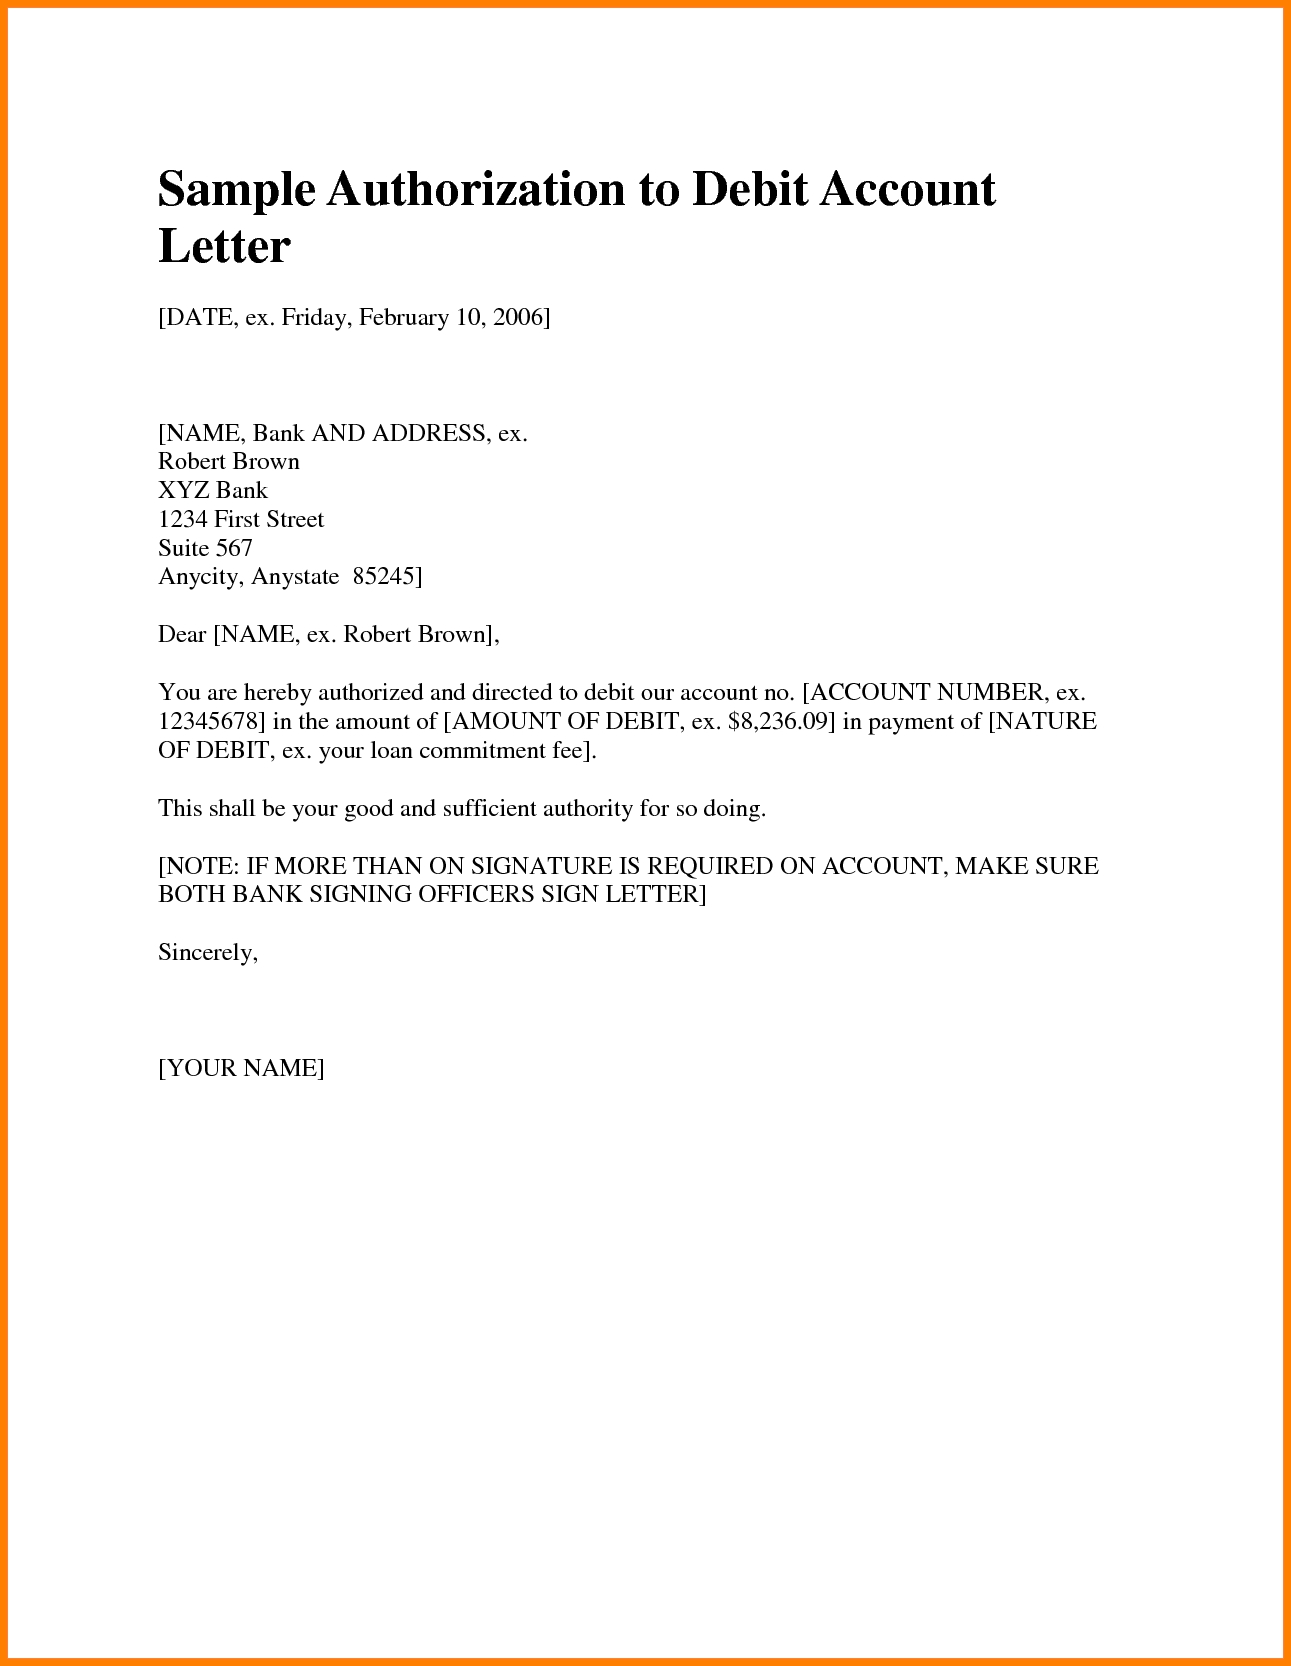 debit authority letter bank formatnk authorization photo new member letter with invoice